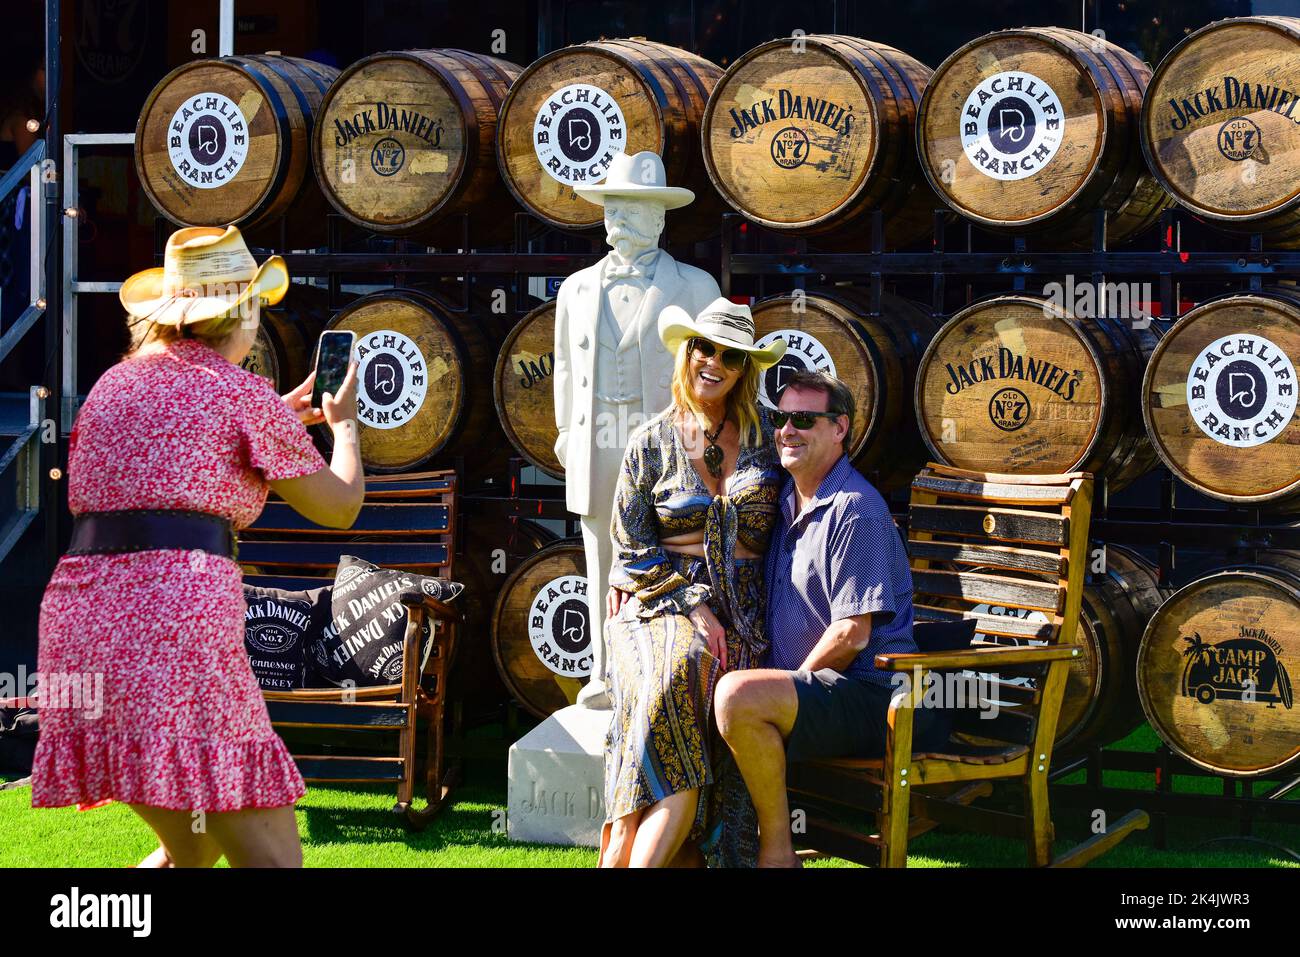 Redondo Beach, California September 17, 2022 - Festival goers taking pictures at the Jack Daniels vendor display at BeachLife Ranch Festival Stock Photo